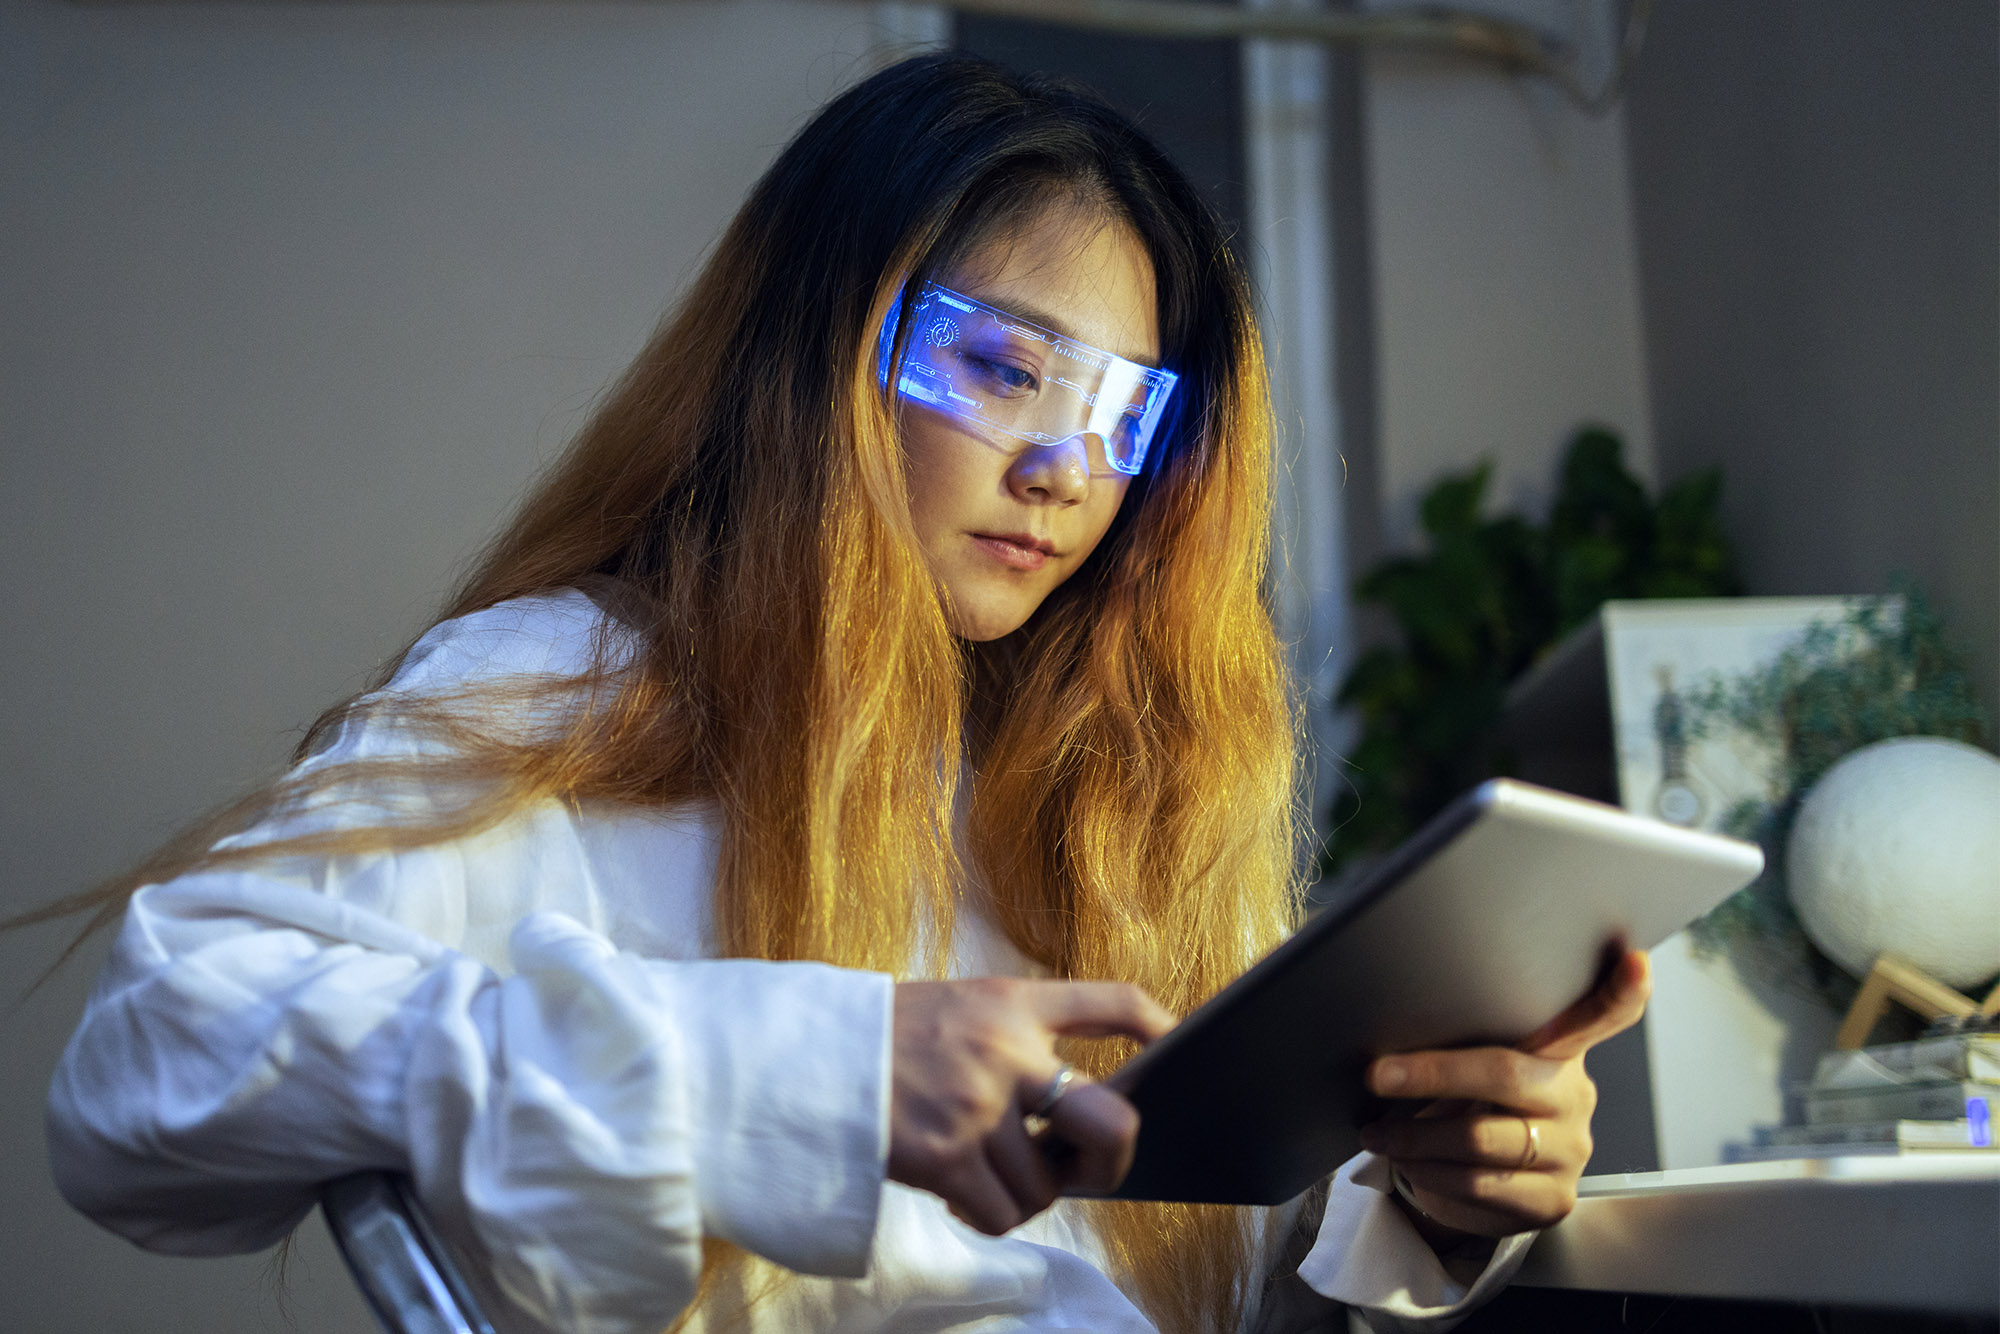 Will AR glasses replace smartphones? It sure looks like it